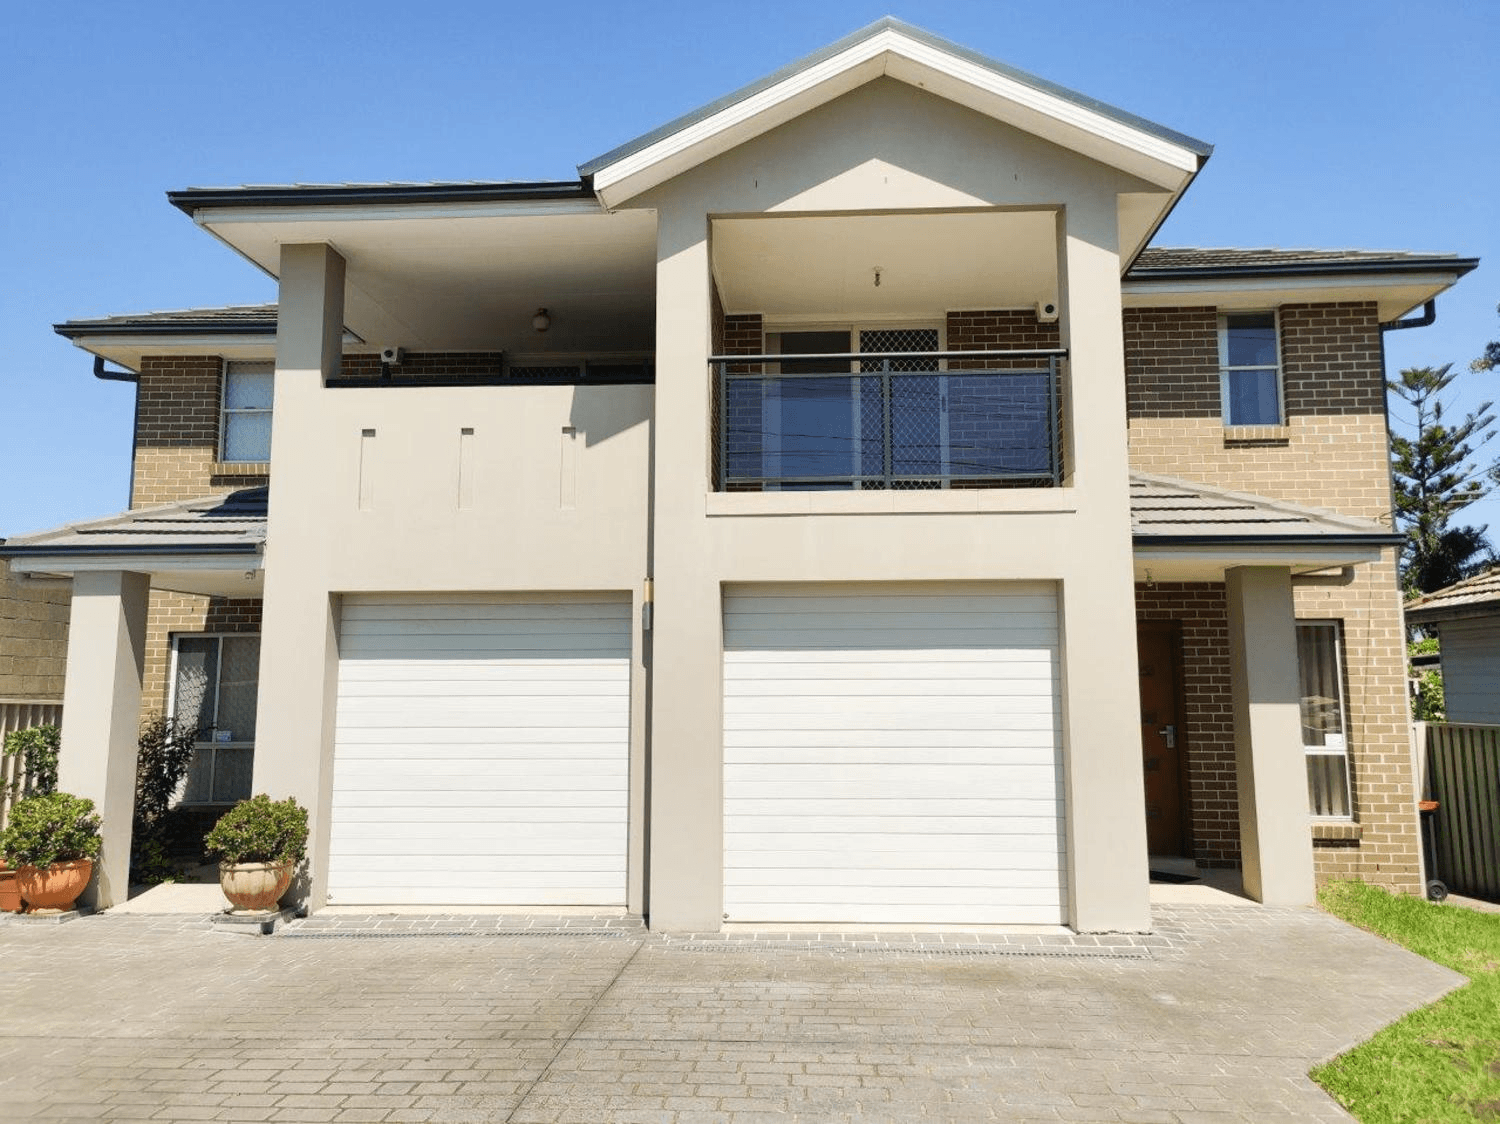 1A Dravet Street, Padstow, NSW 2211